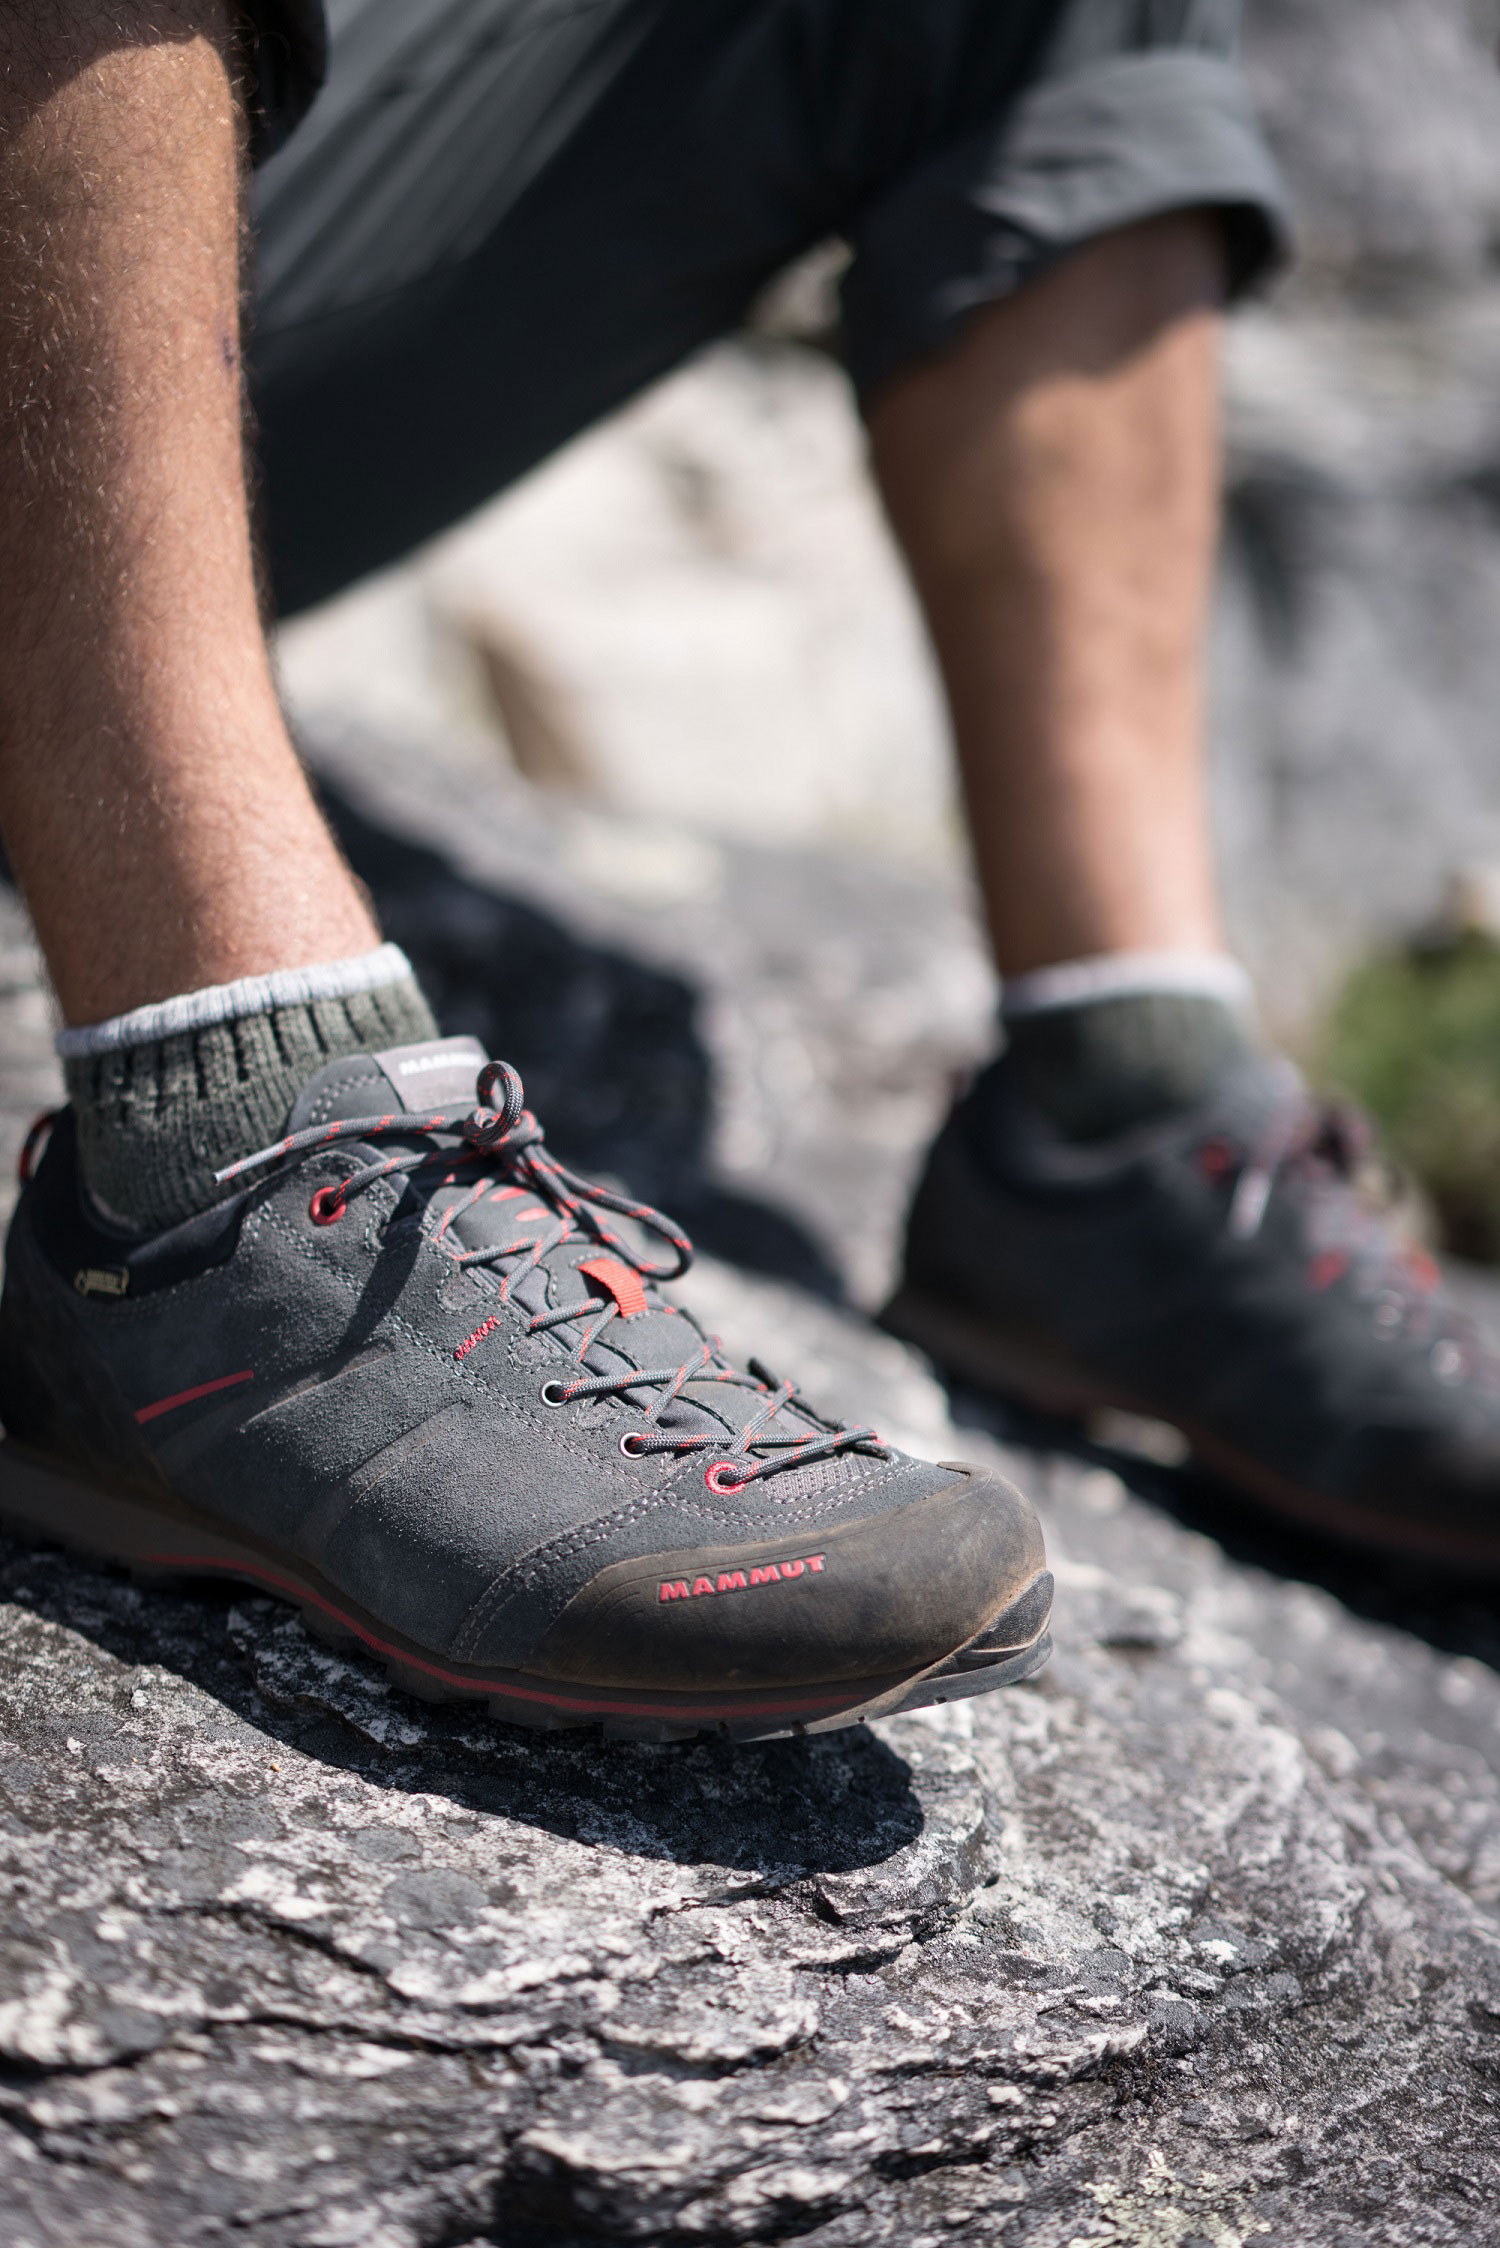 Review : Mammut Wall Guide Low GORE-TEX | Snow+Rock